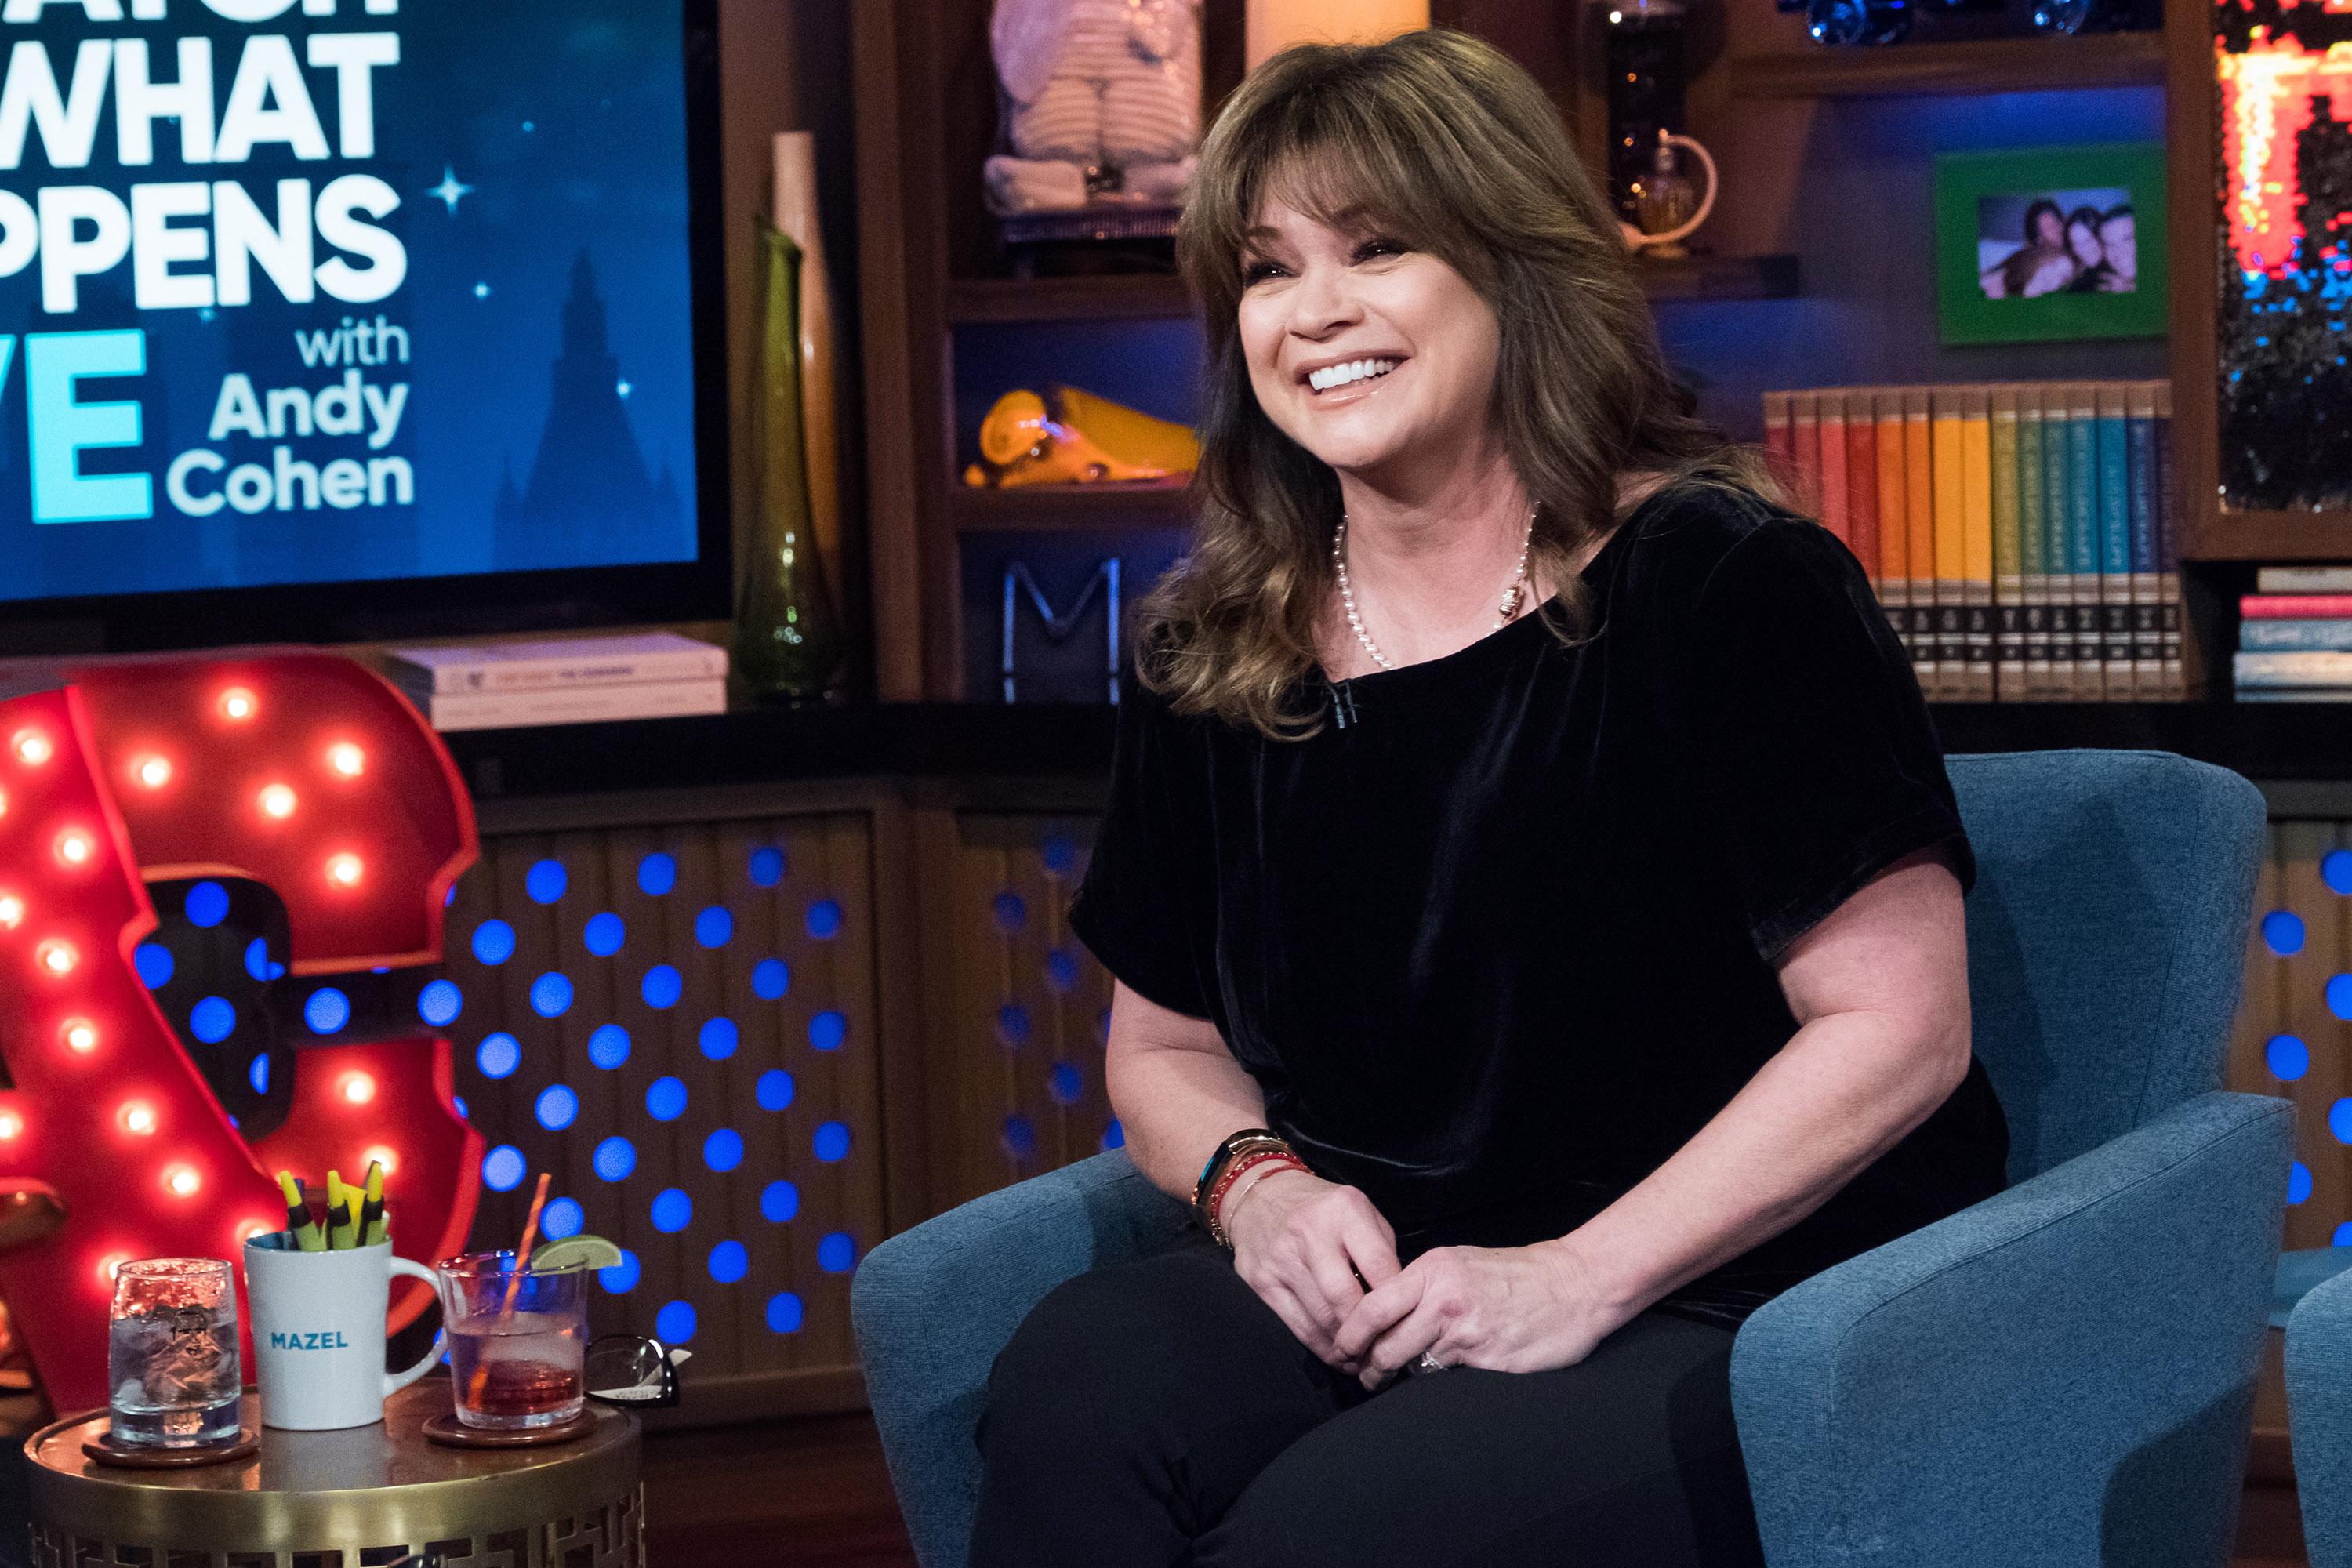 Valerie Bertinelli on a season 14 episode of "Watch What Happens Live with Andy Cohen" in 2017 | Source: Getty Images